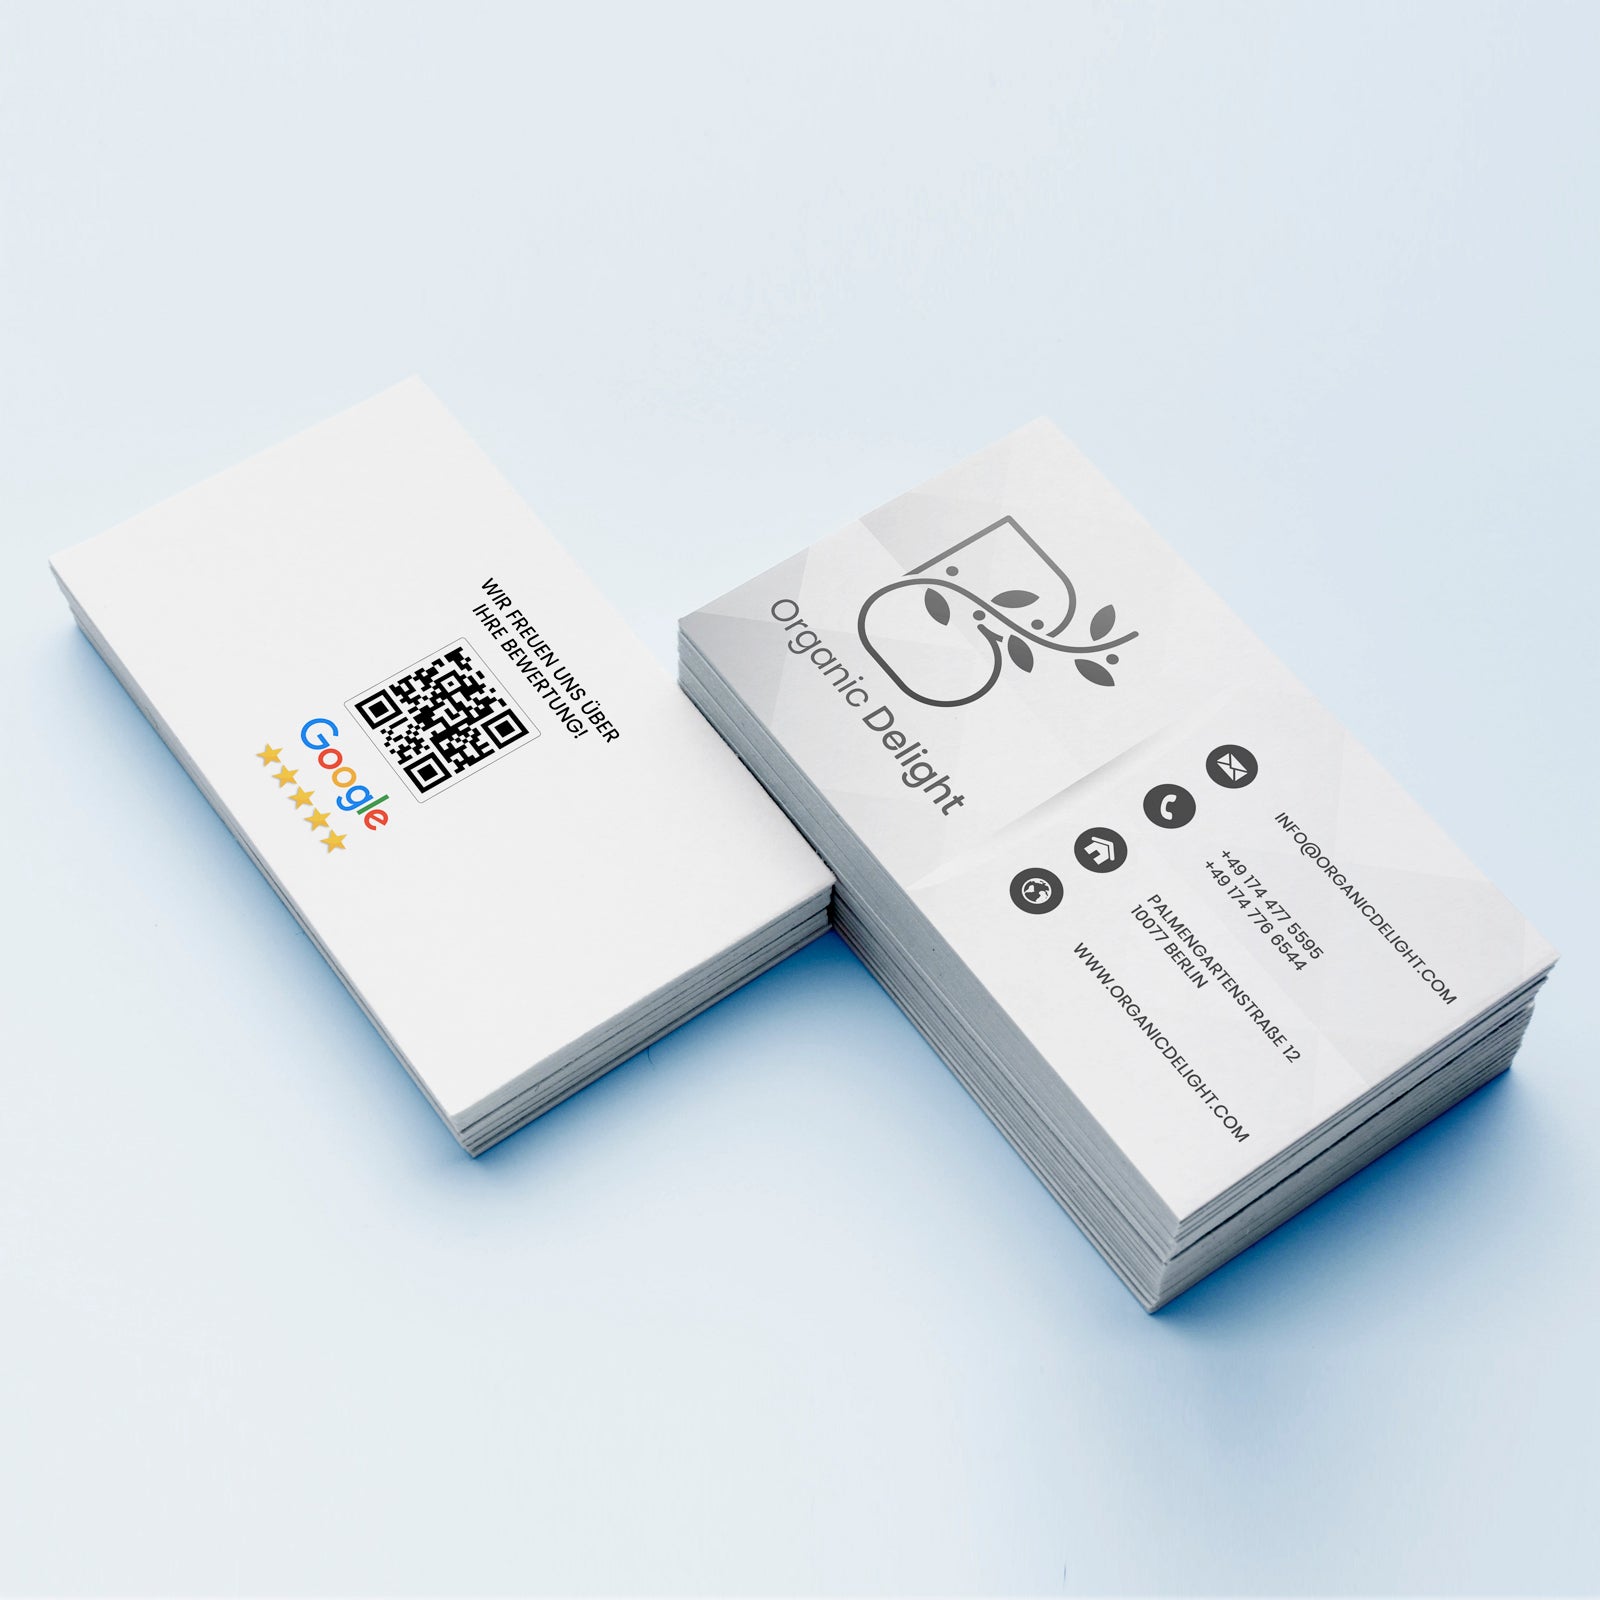 100 business cards with your new logo